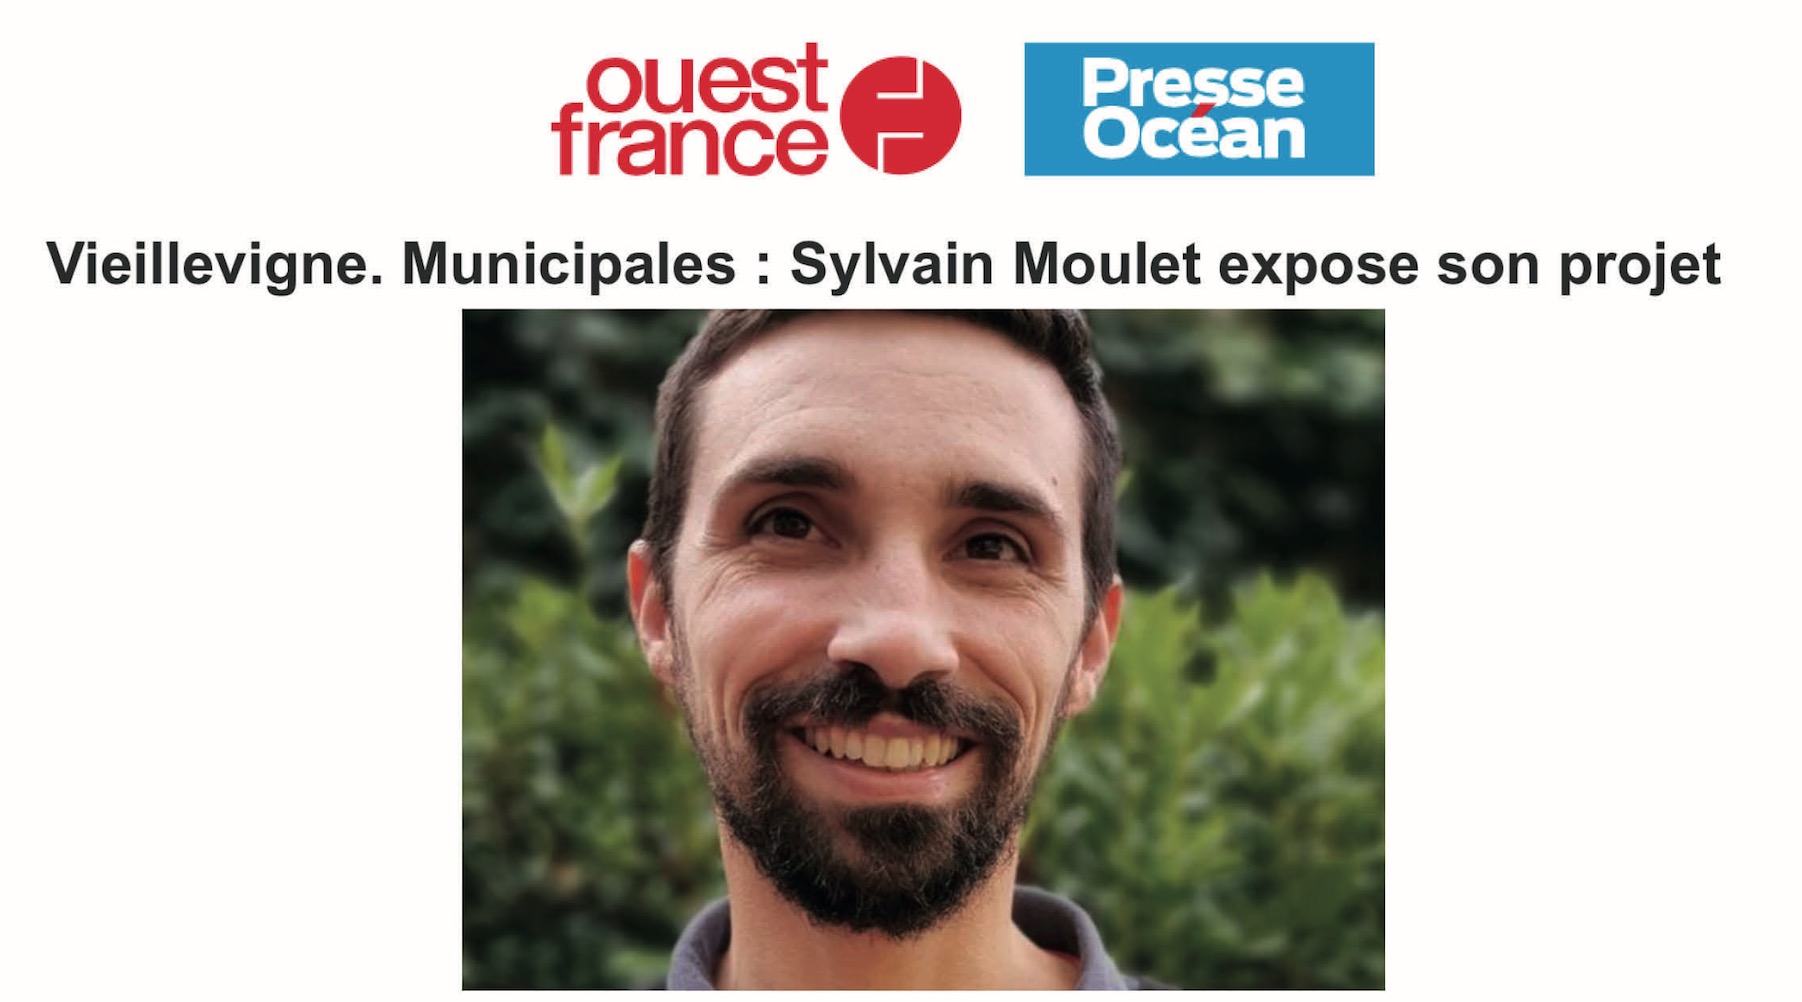 You are currently viewing Vieillevigne, Municipales : Sylvain Moulet expose son projet